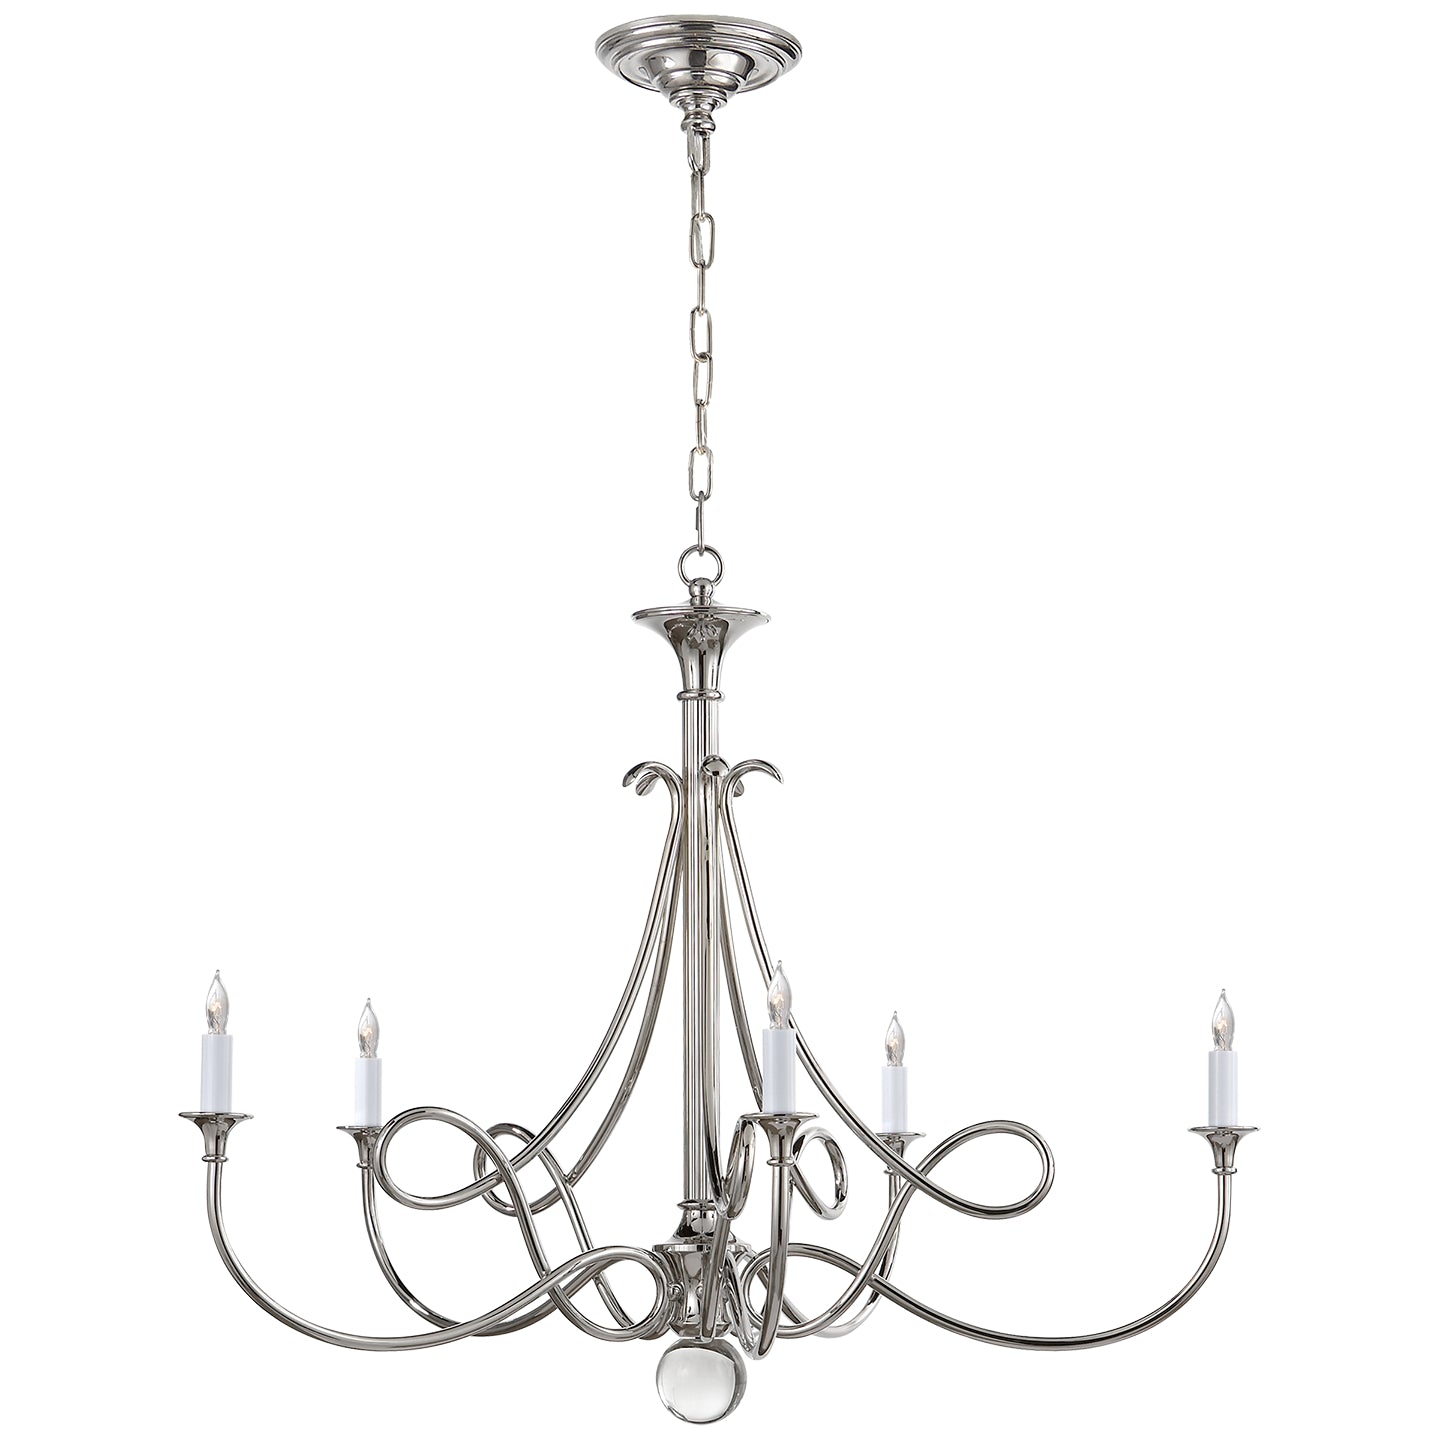 Load image into Gallery viewer, Visual Comfort Signature - SC 5005PN - Five Light Chandelier - Double Twist - Polished Nickel
